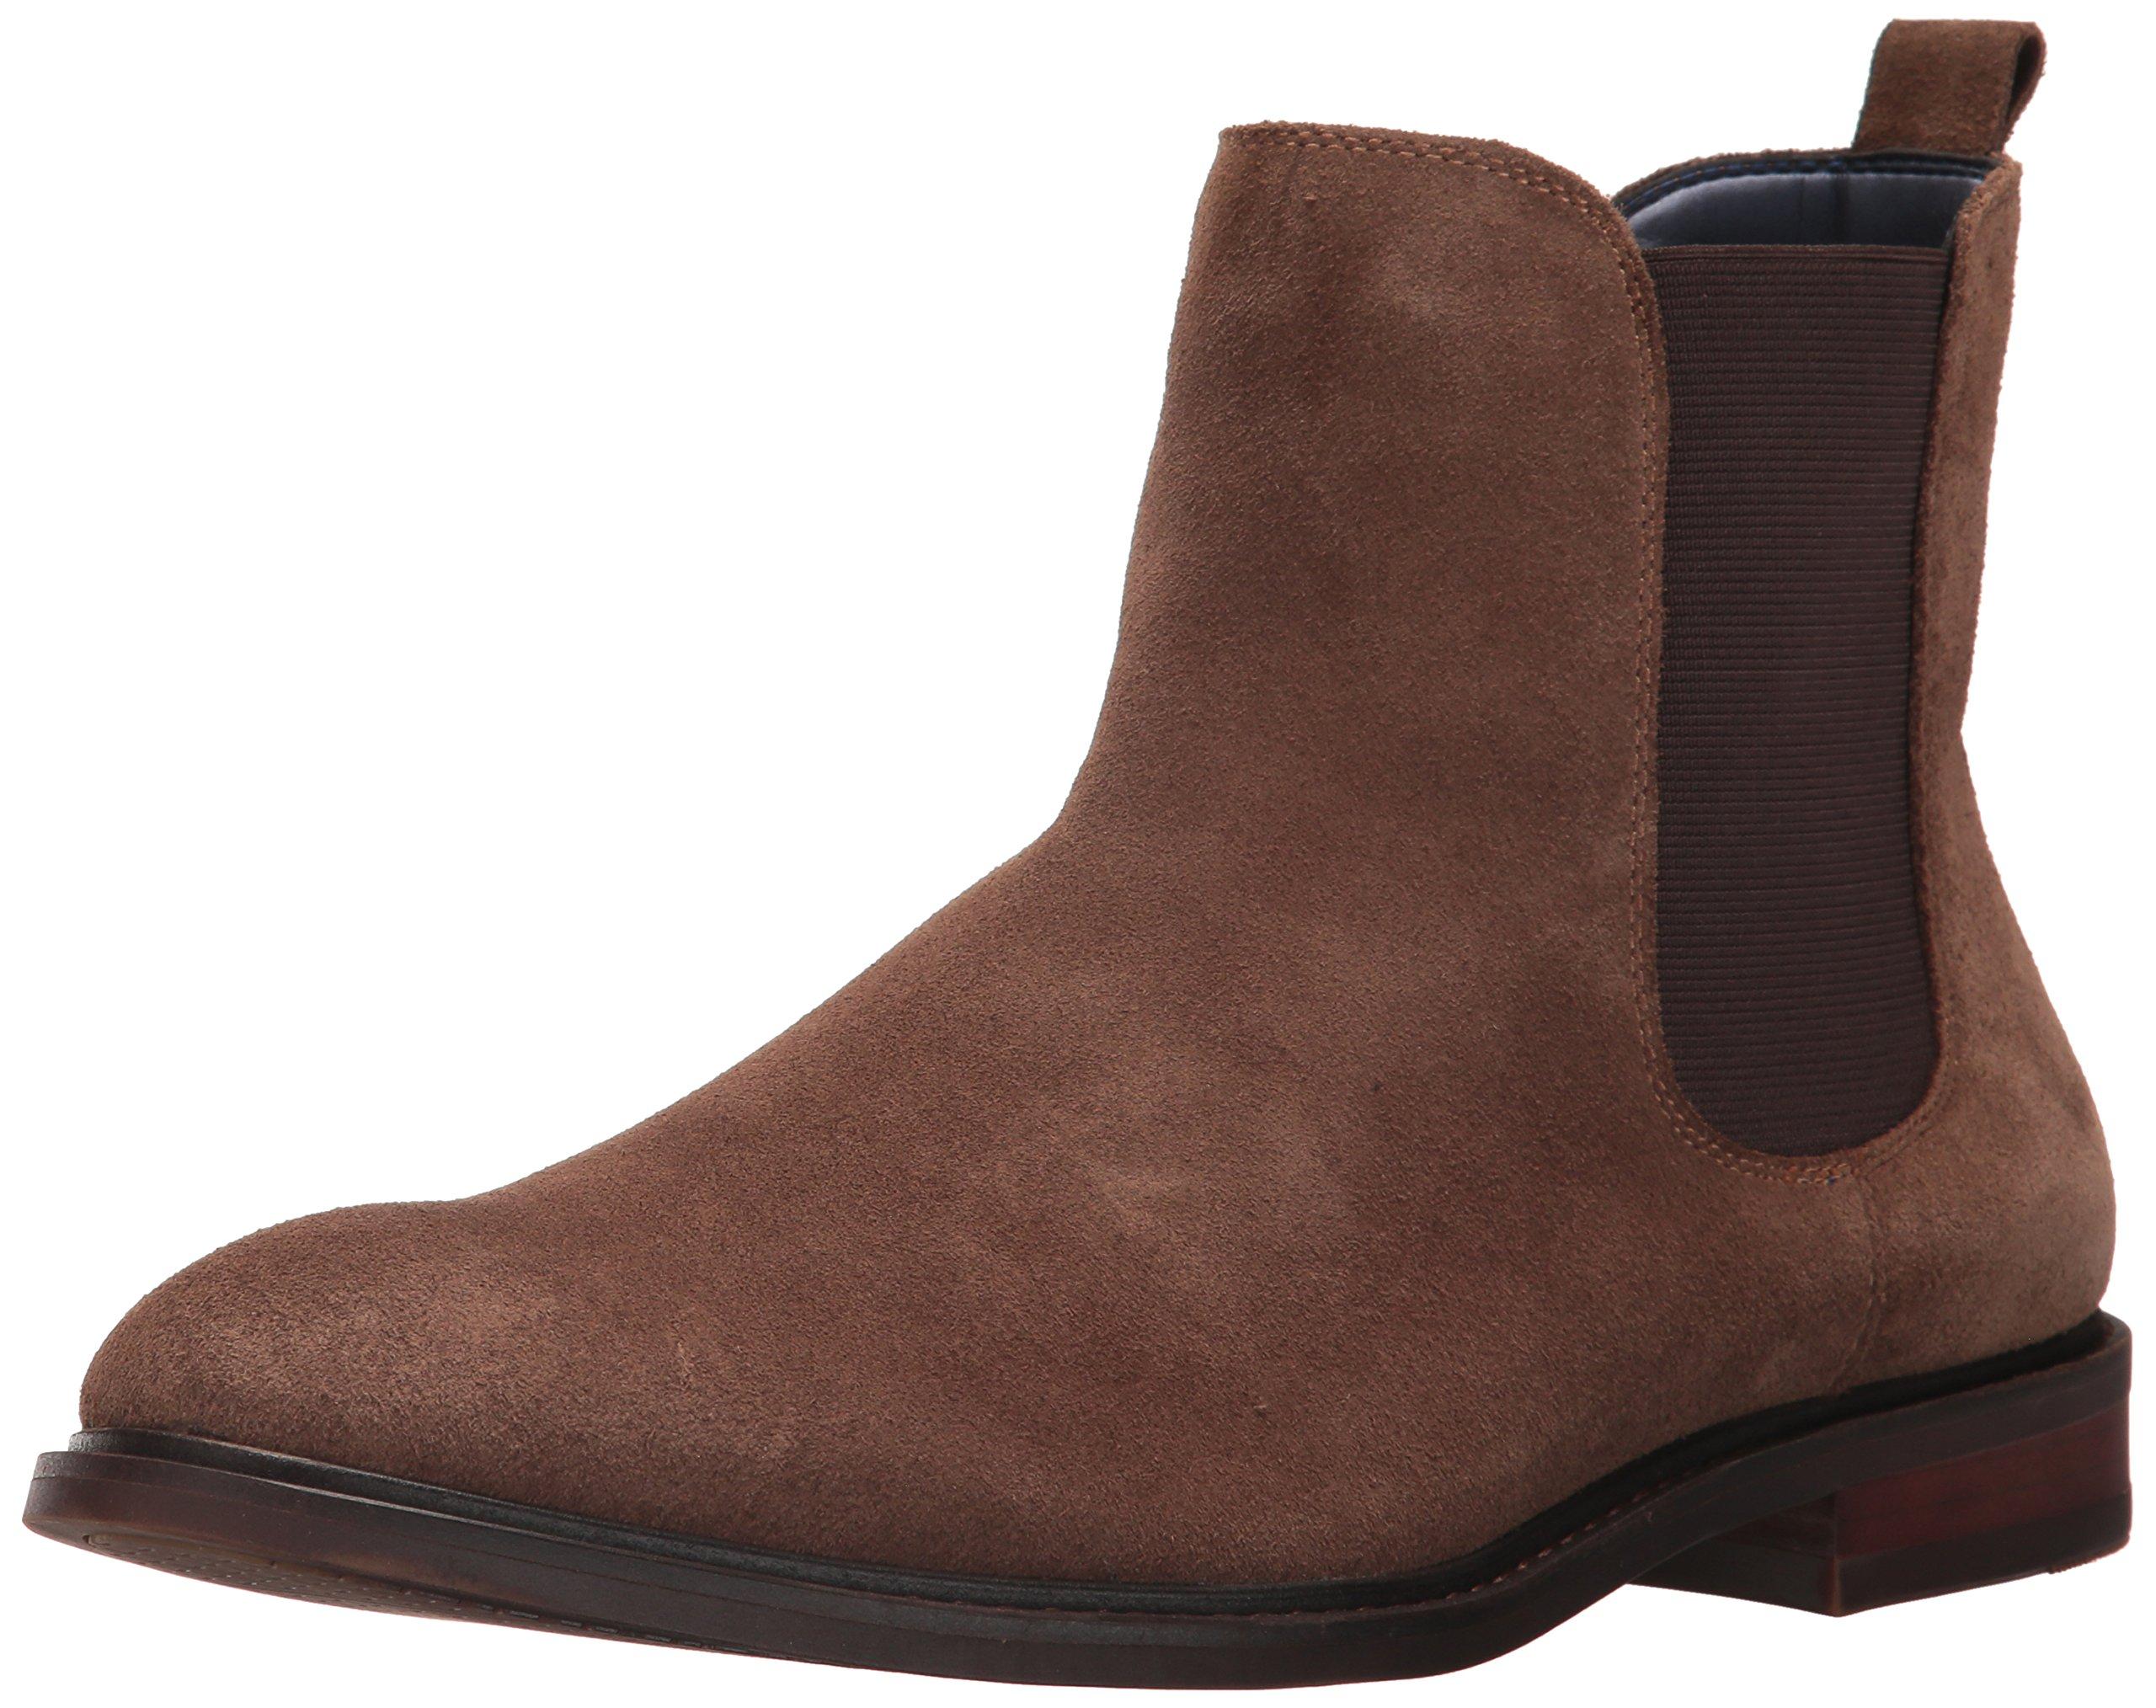 Steve Madden Backfire Chelsea Boot in Taupe Suede (Brown) for Men - Lyst